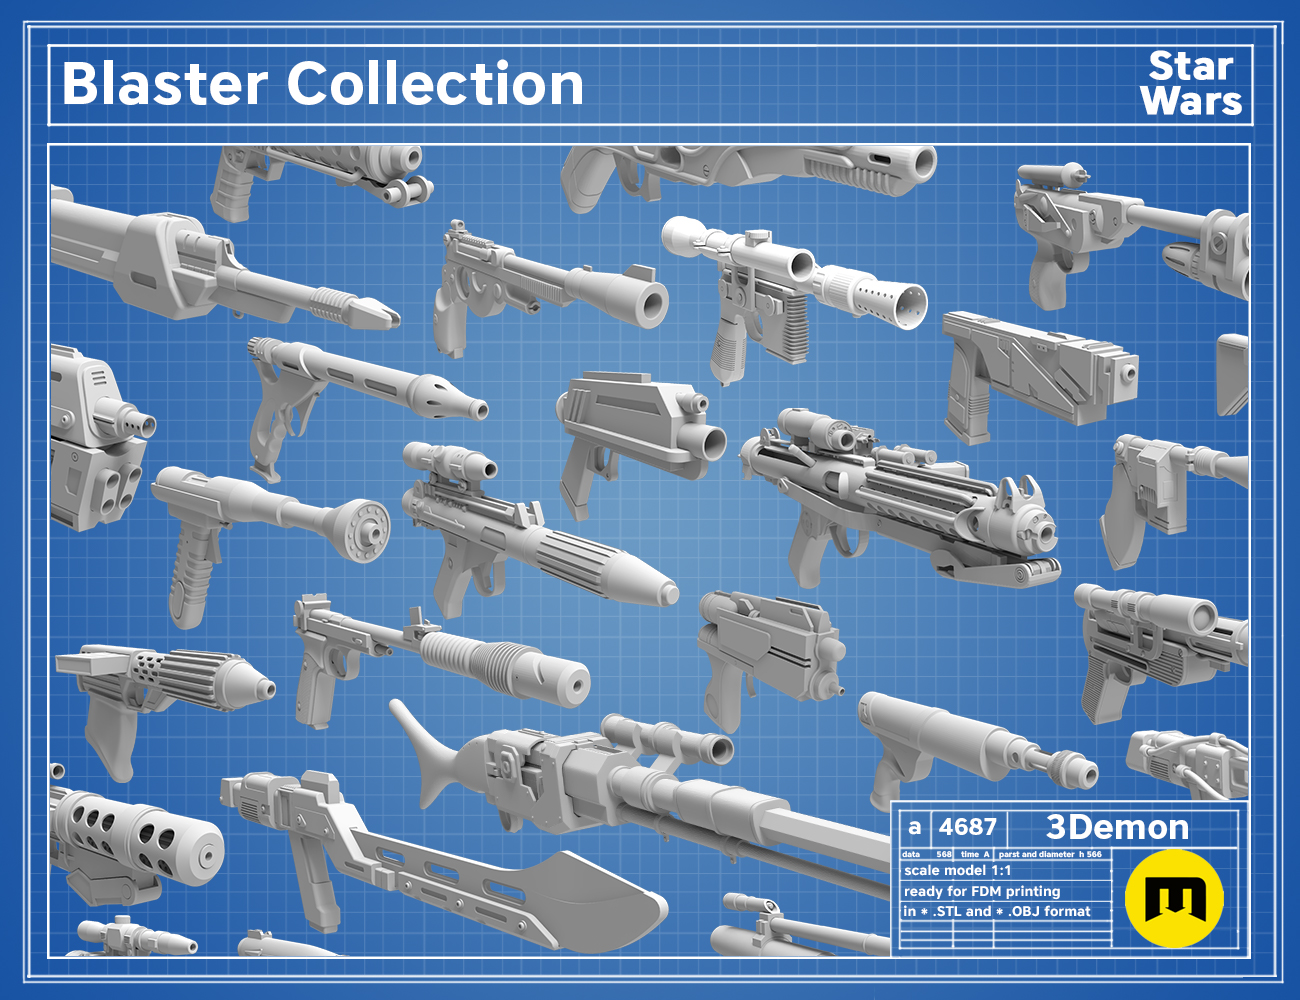 Star Wars 6 Inch Black Series Action Figure Stand 3D model 3D printable